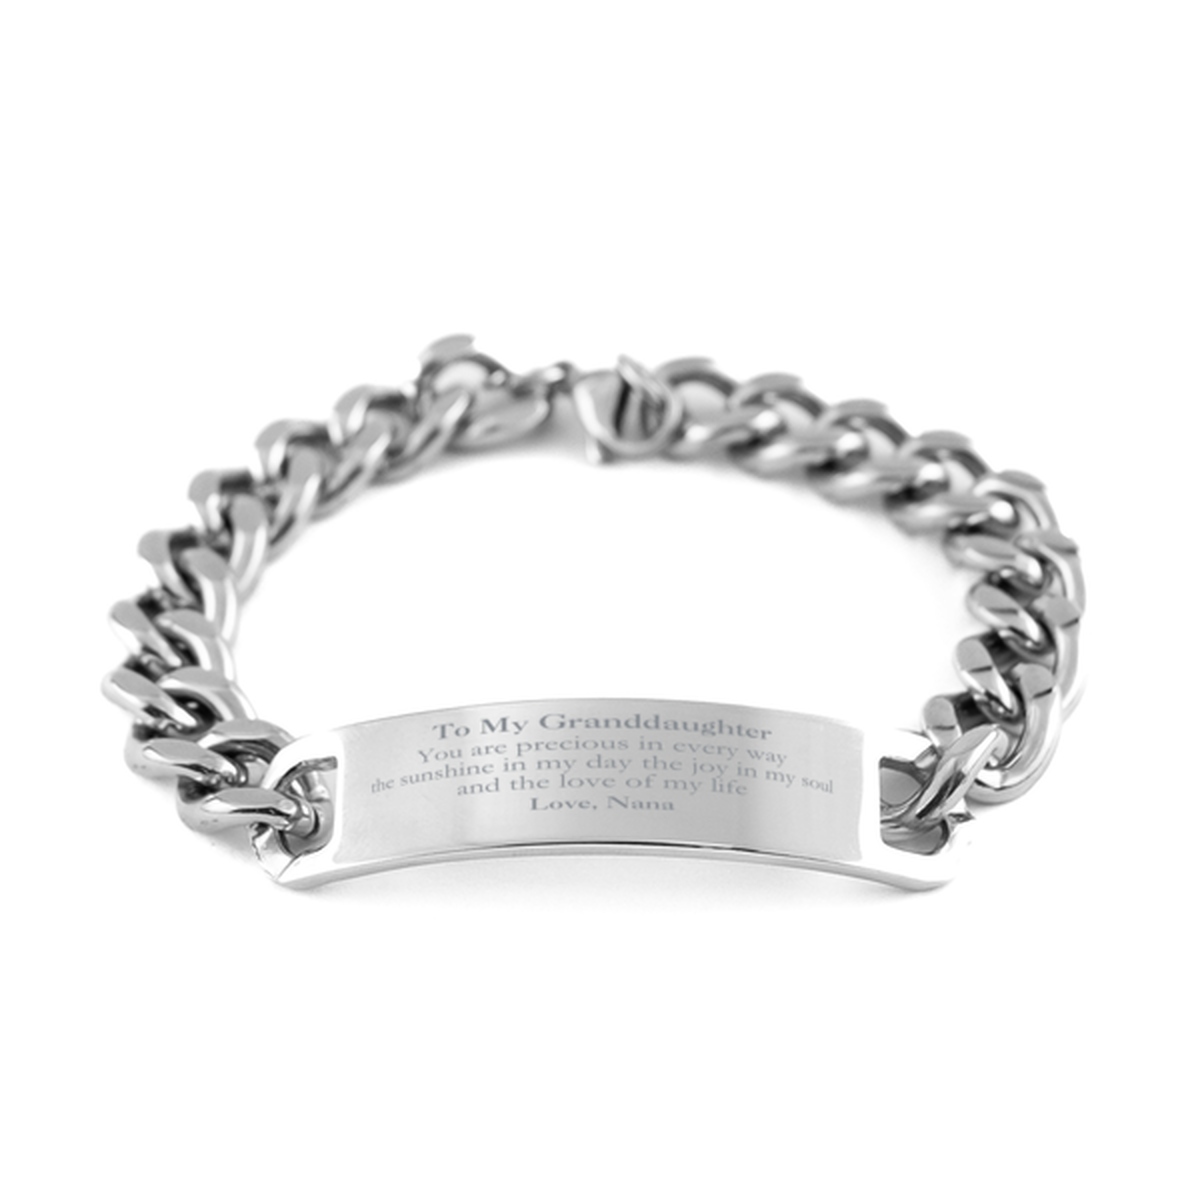 Graduation Gifts for Granddaughter Cuban Chain Stainless Steel Bracelet Present from Nana, Christmas Granddaughter Birthday Gifts Granddaughter You are precious in every way the sunshine in my day. Love, Nana